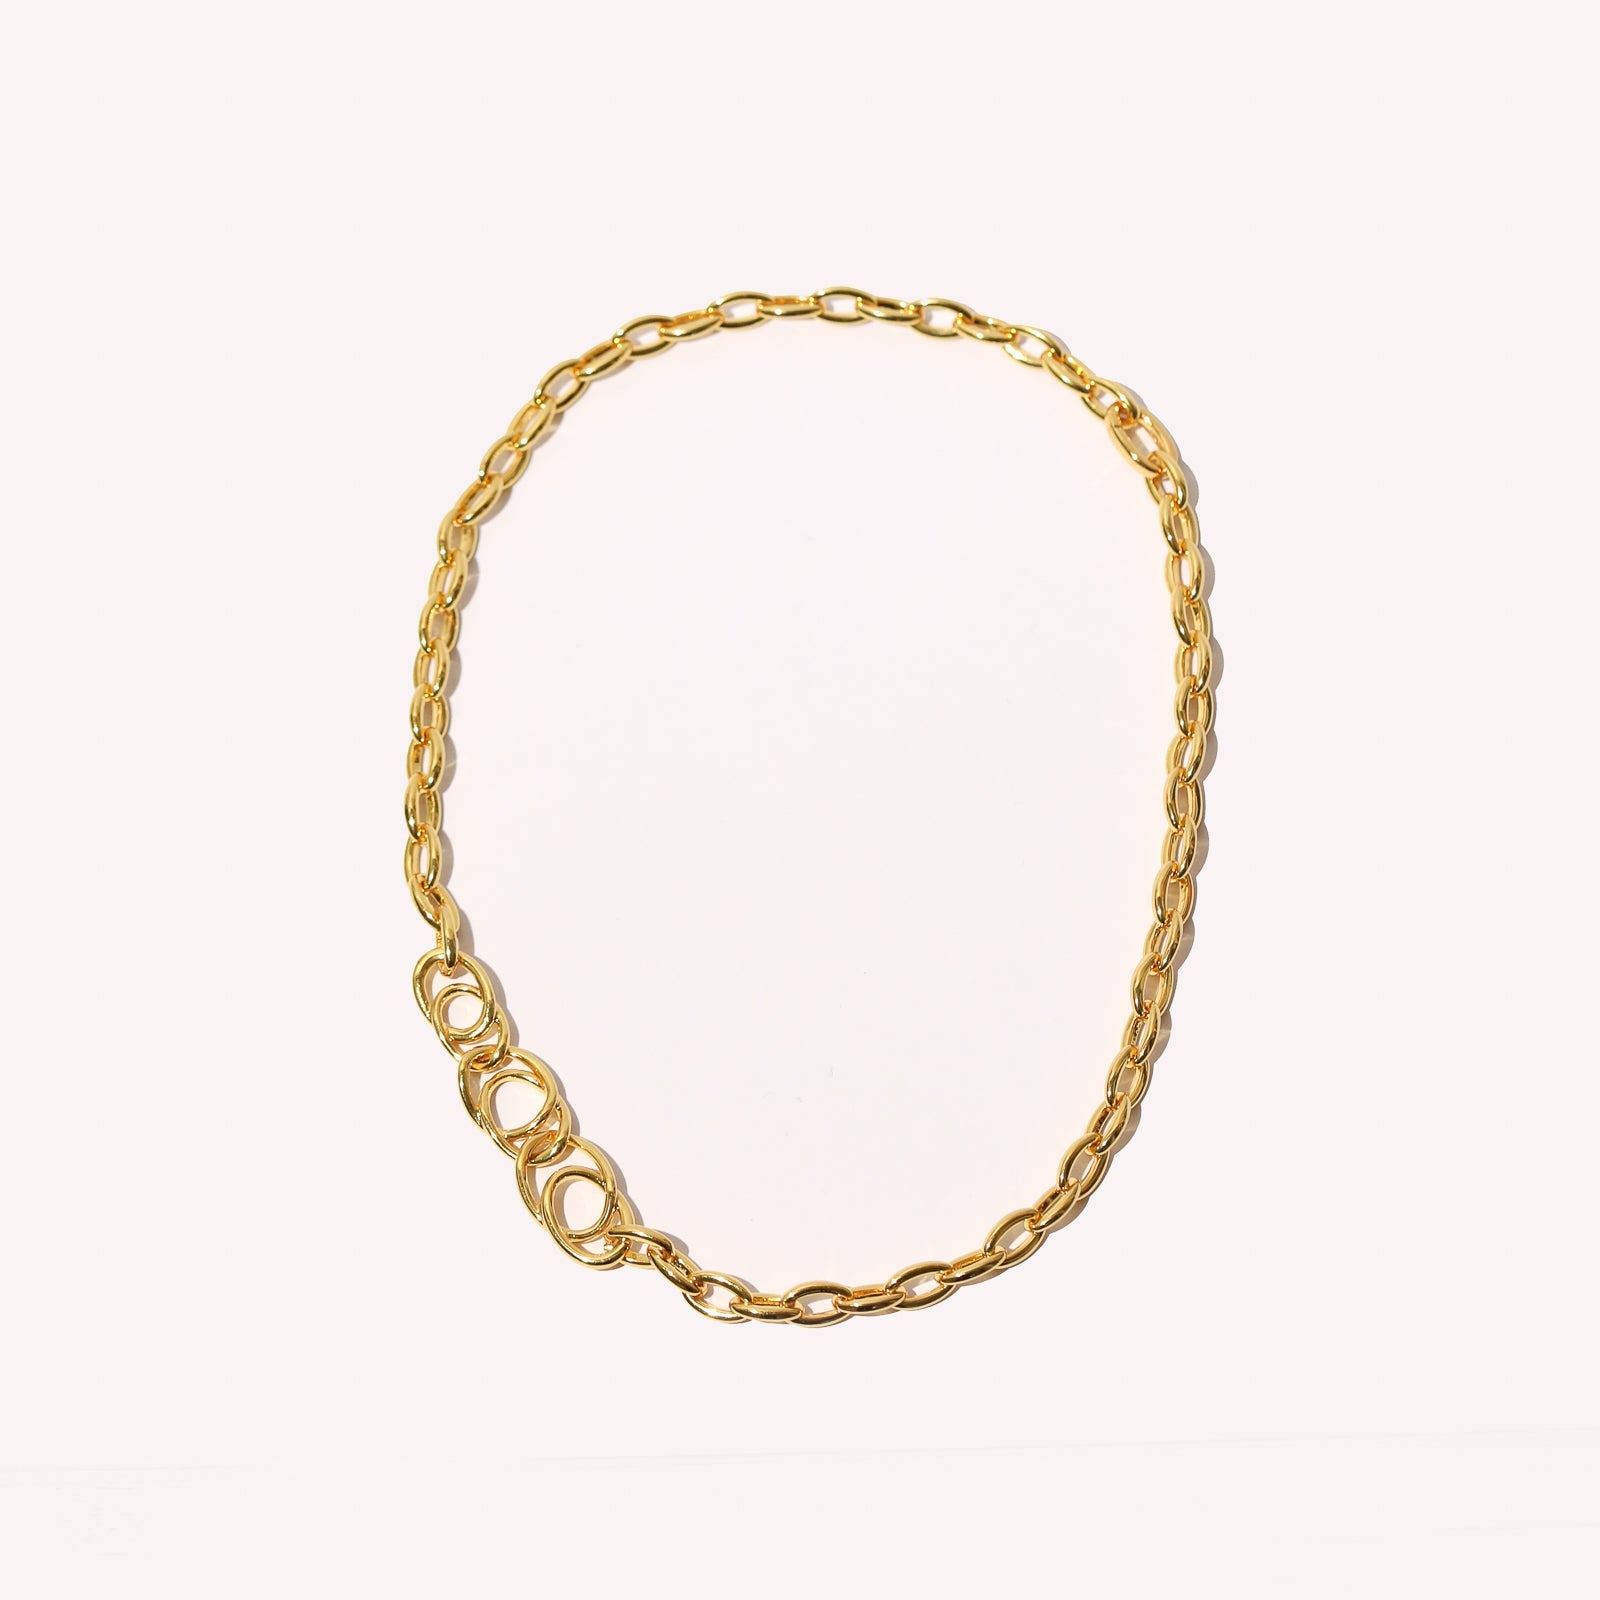 Orbit Chain Necklace in Gold flat lay